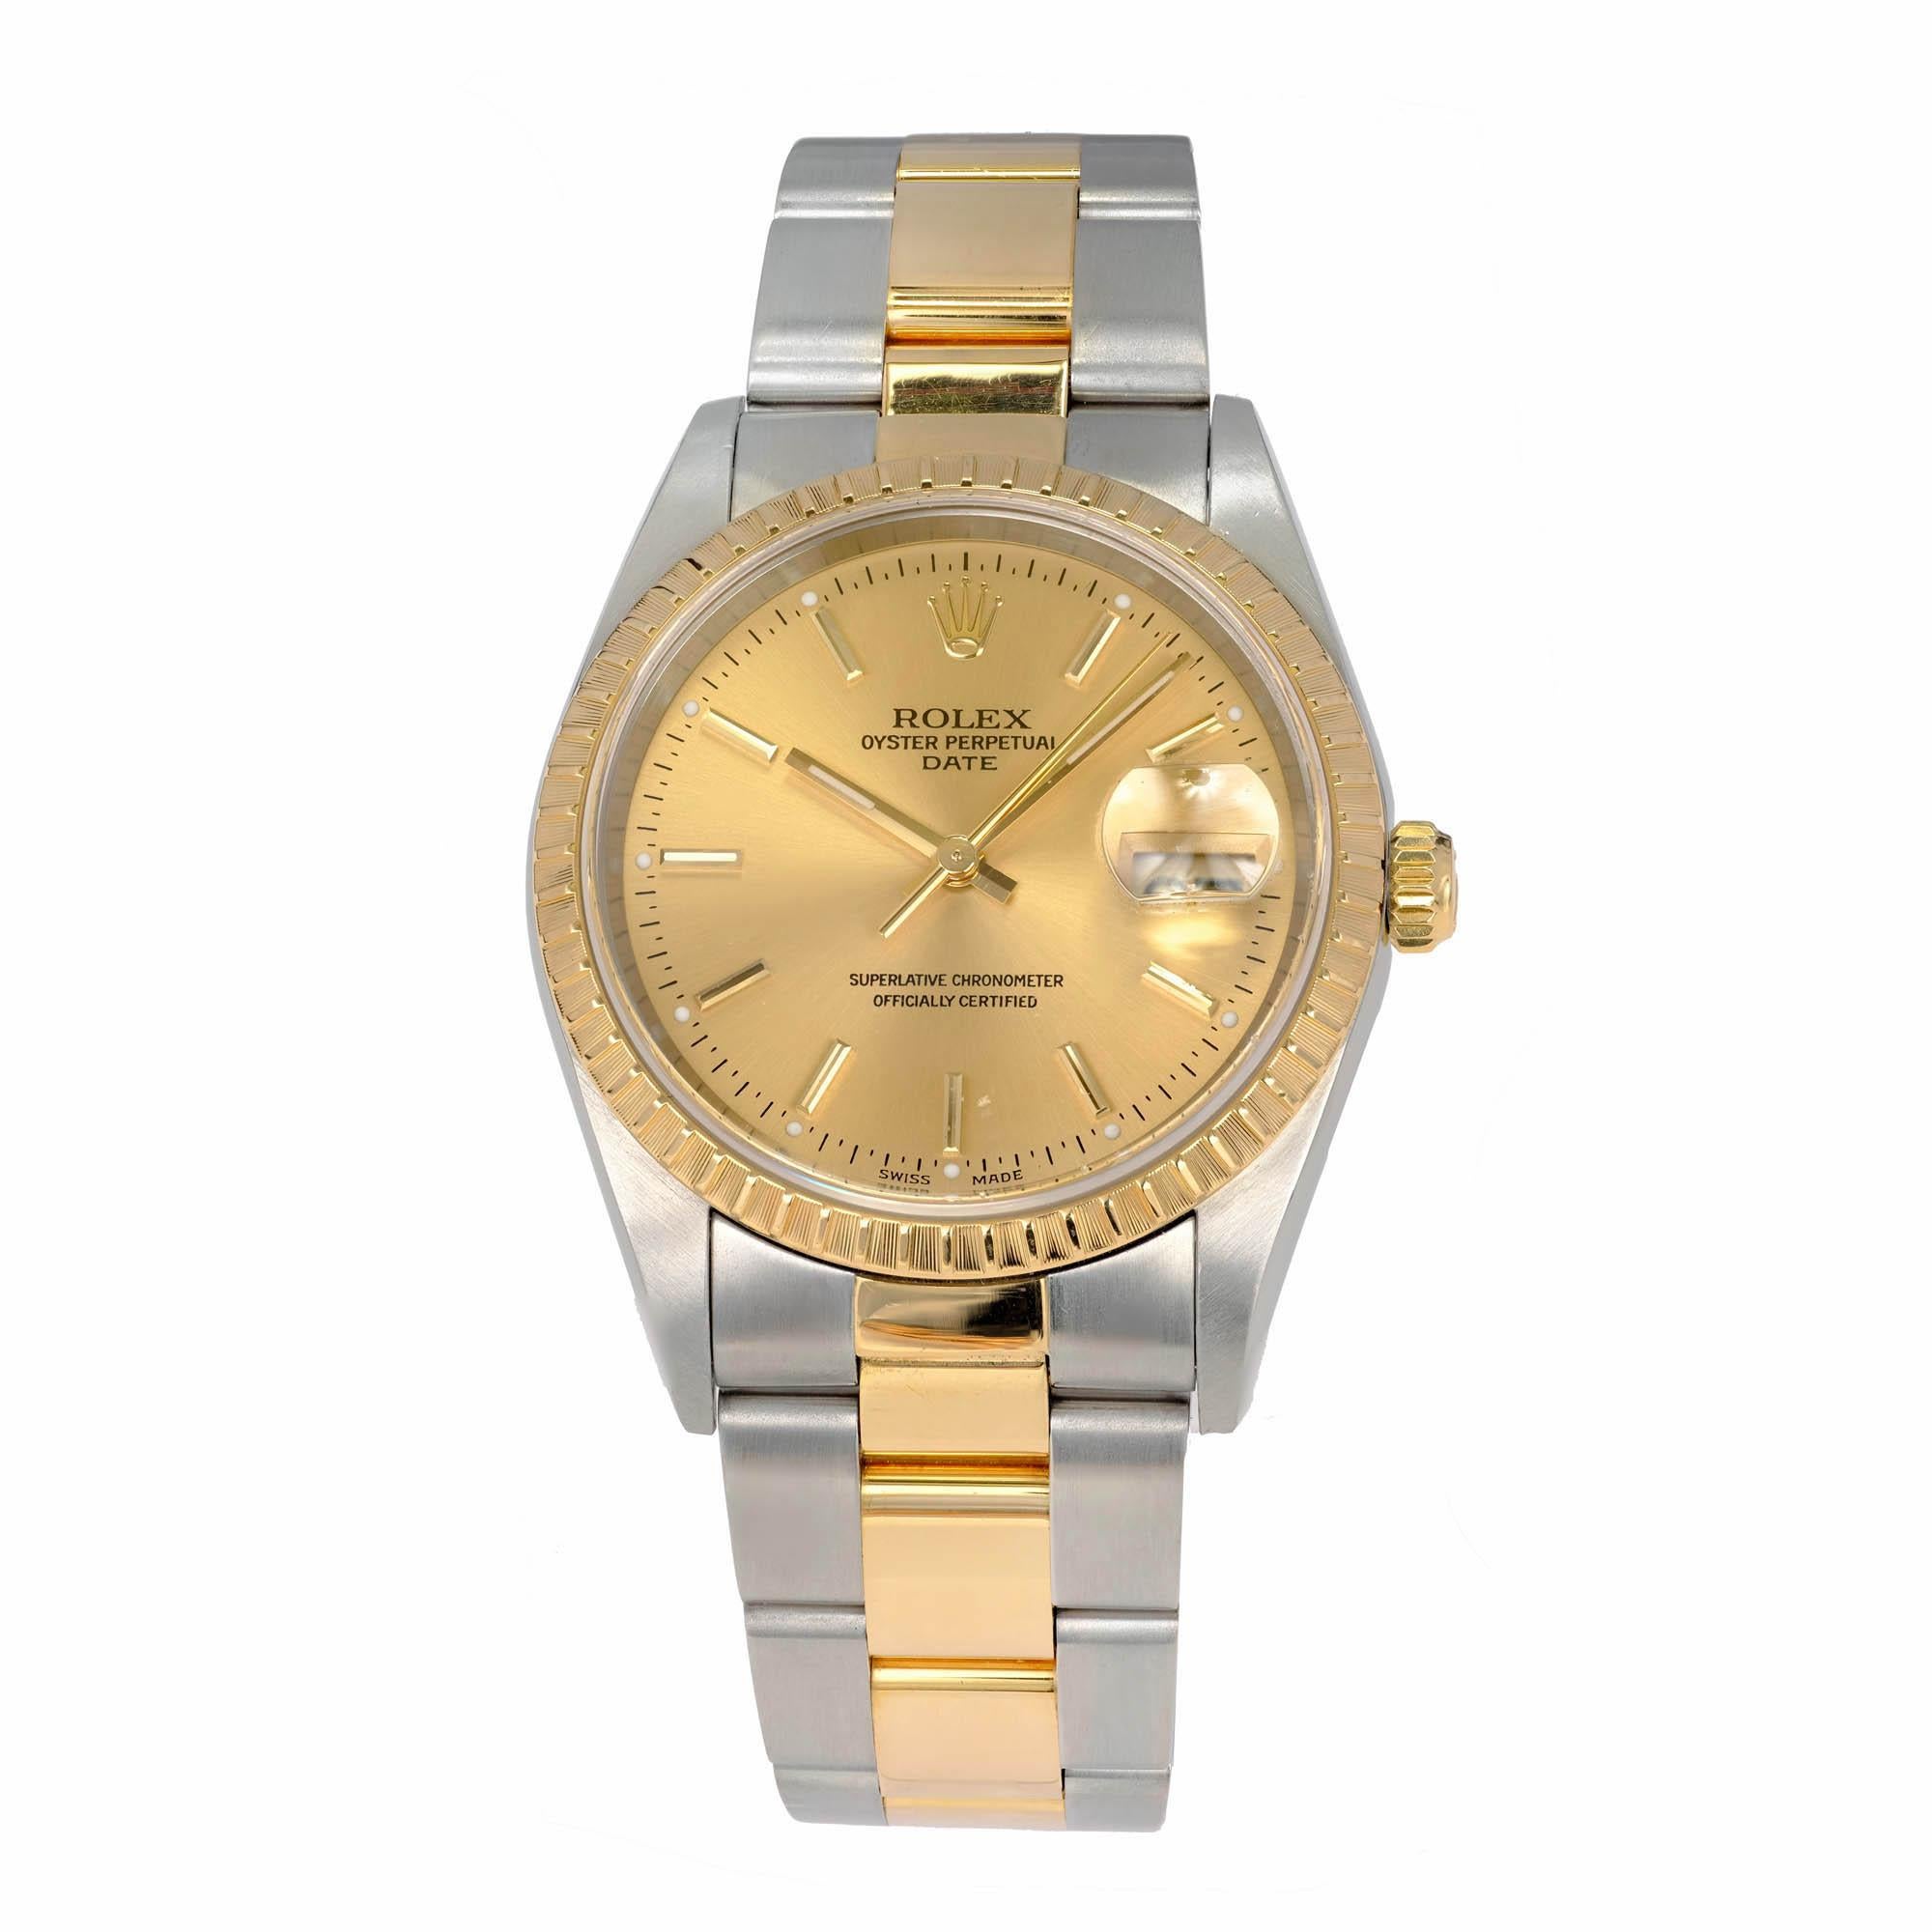 Mens two-tone 18k yellow gold stainless date just Rolex. Champagne dial with fluted bezel.

Length: 7 ½ - 8 inches
Width: 34mm
Band Width at case: 18mm
Band: Oyster two-tone
Crystal: sapphire
Dial: gold and steel
Other: Model 15223 Serial # A989755

